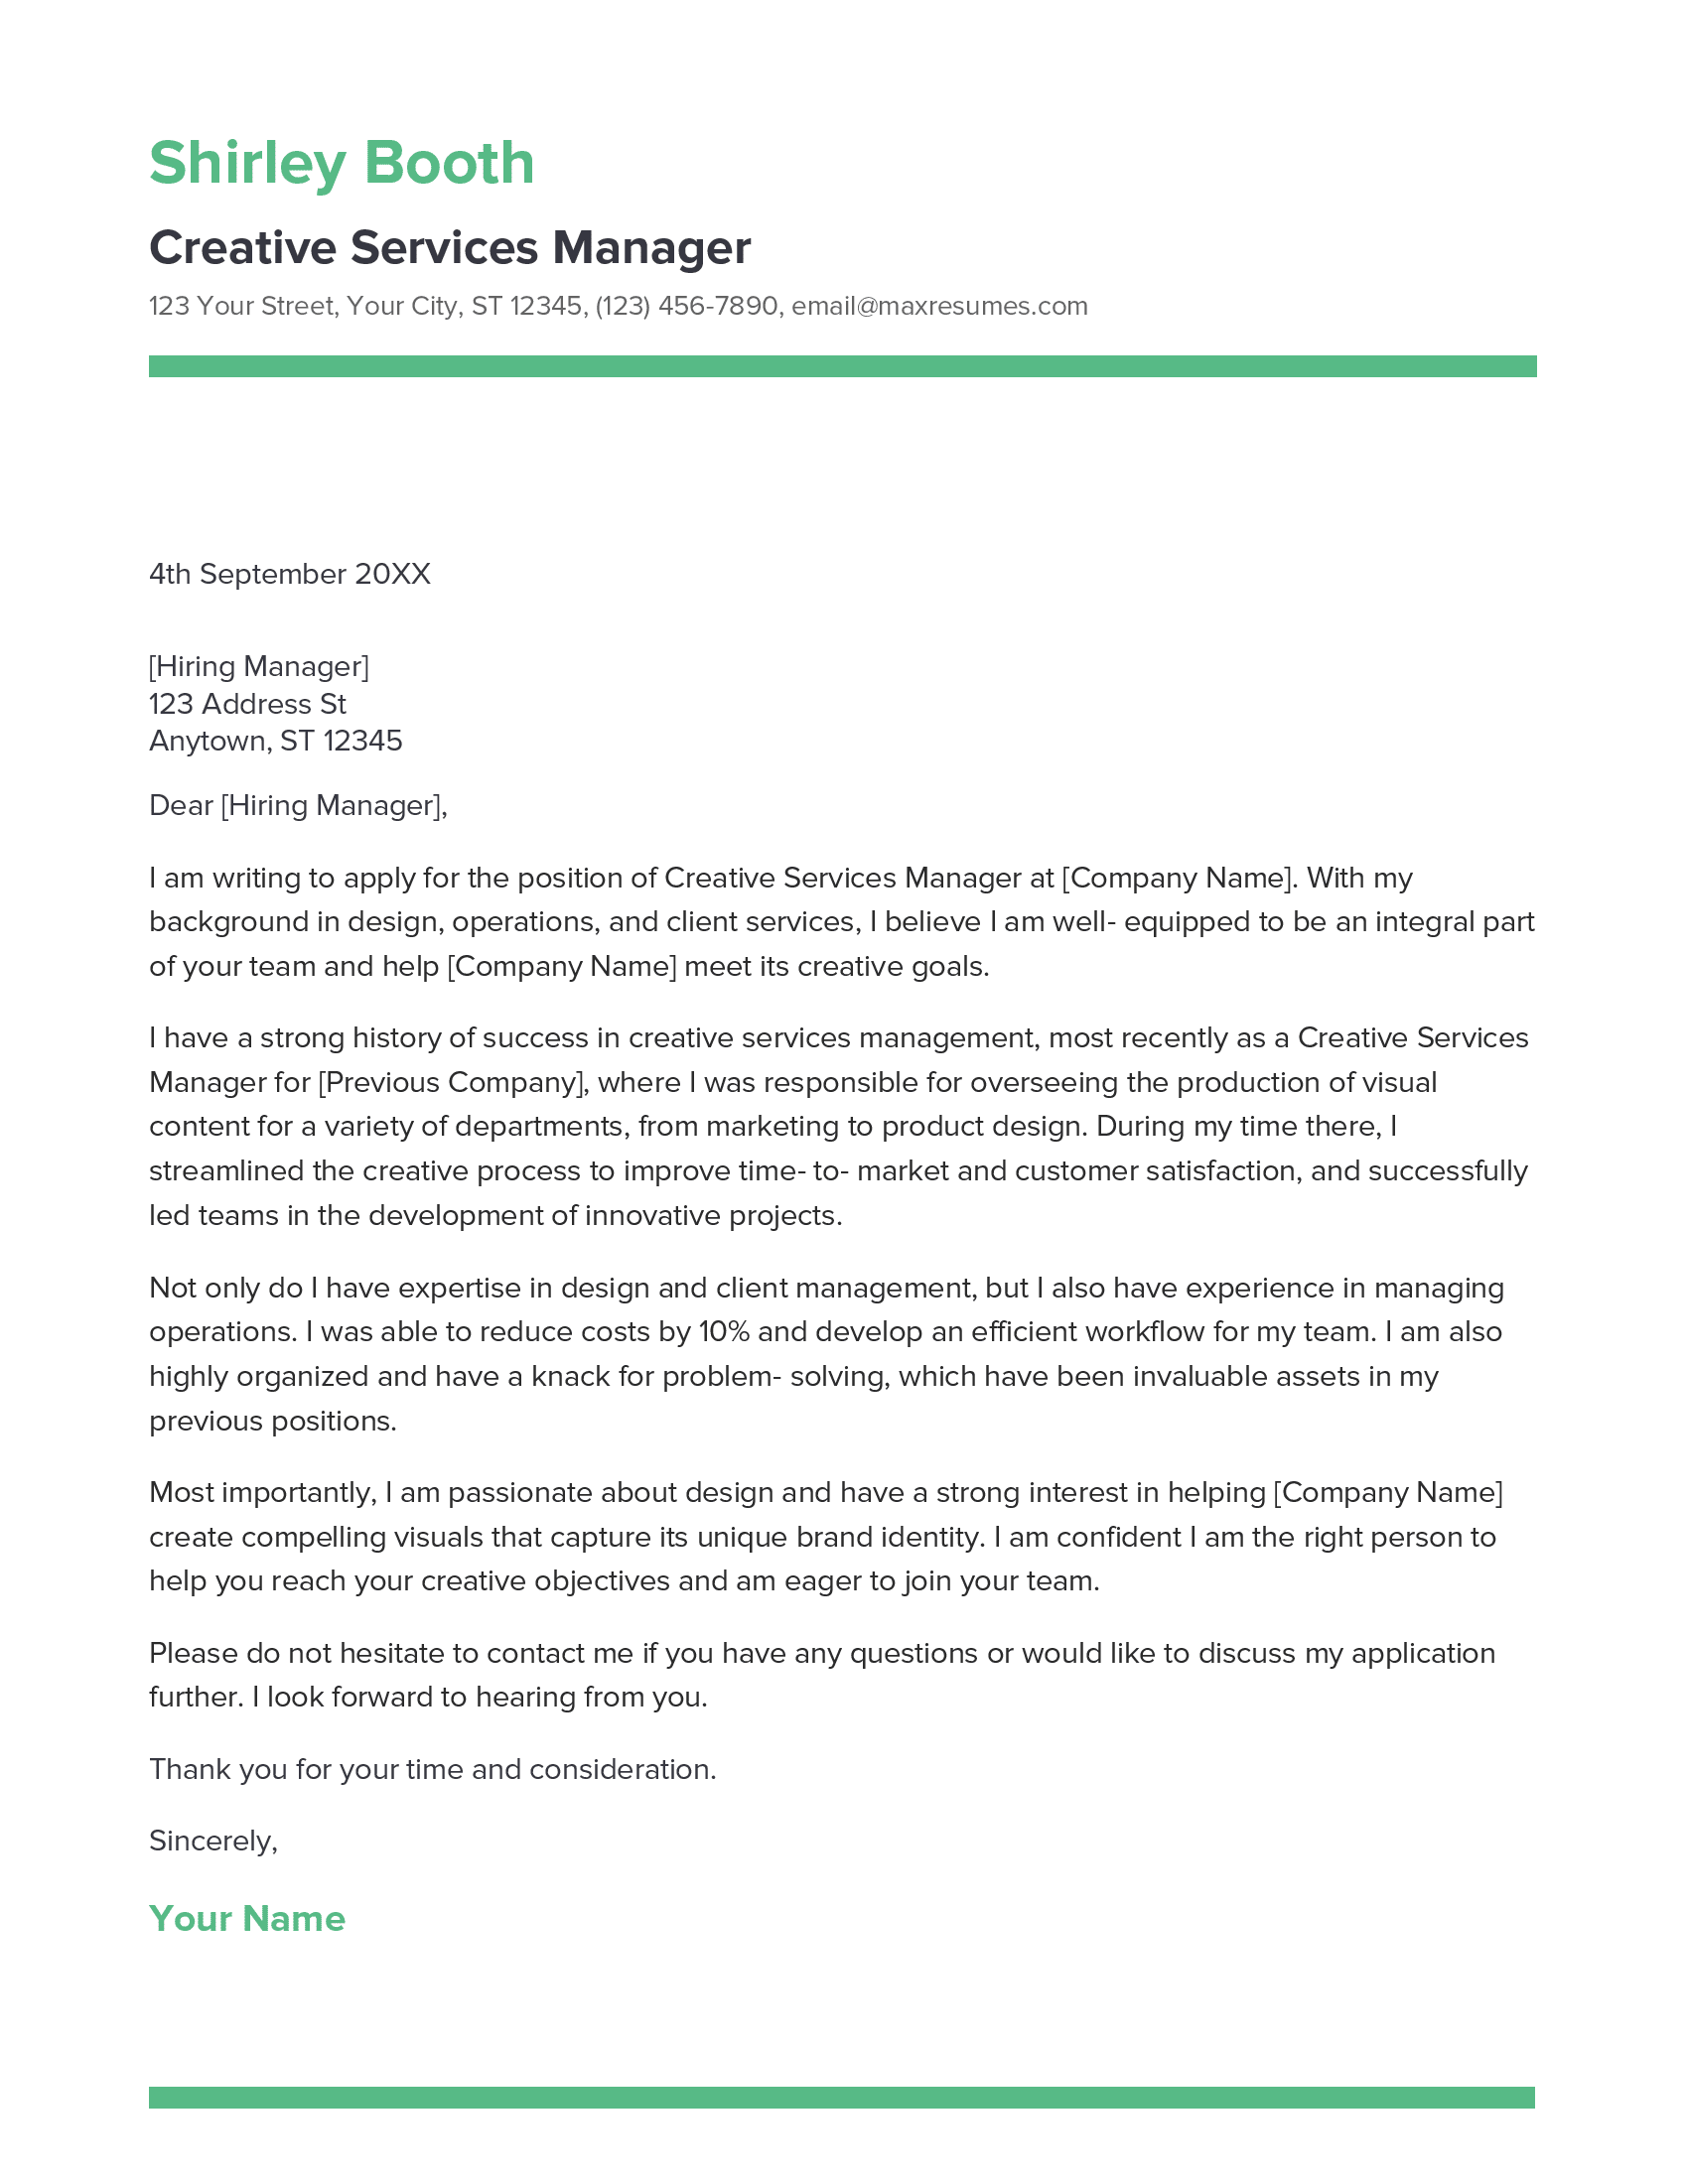 Creative Services Manager Cover Letter Example